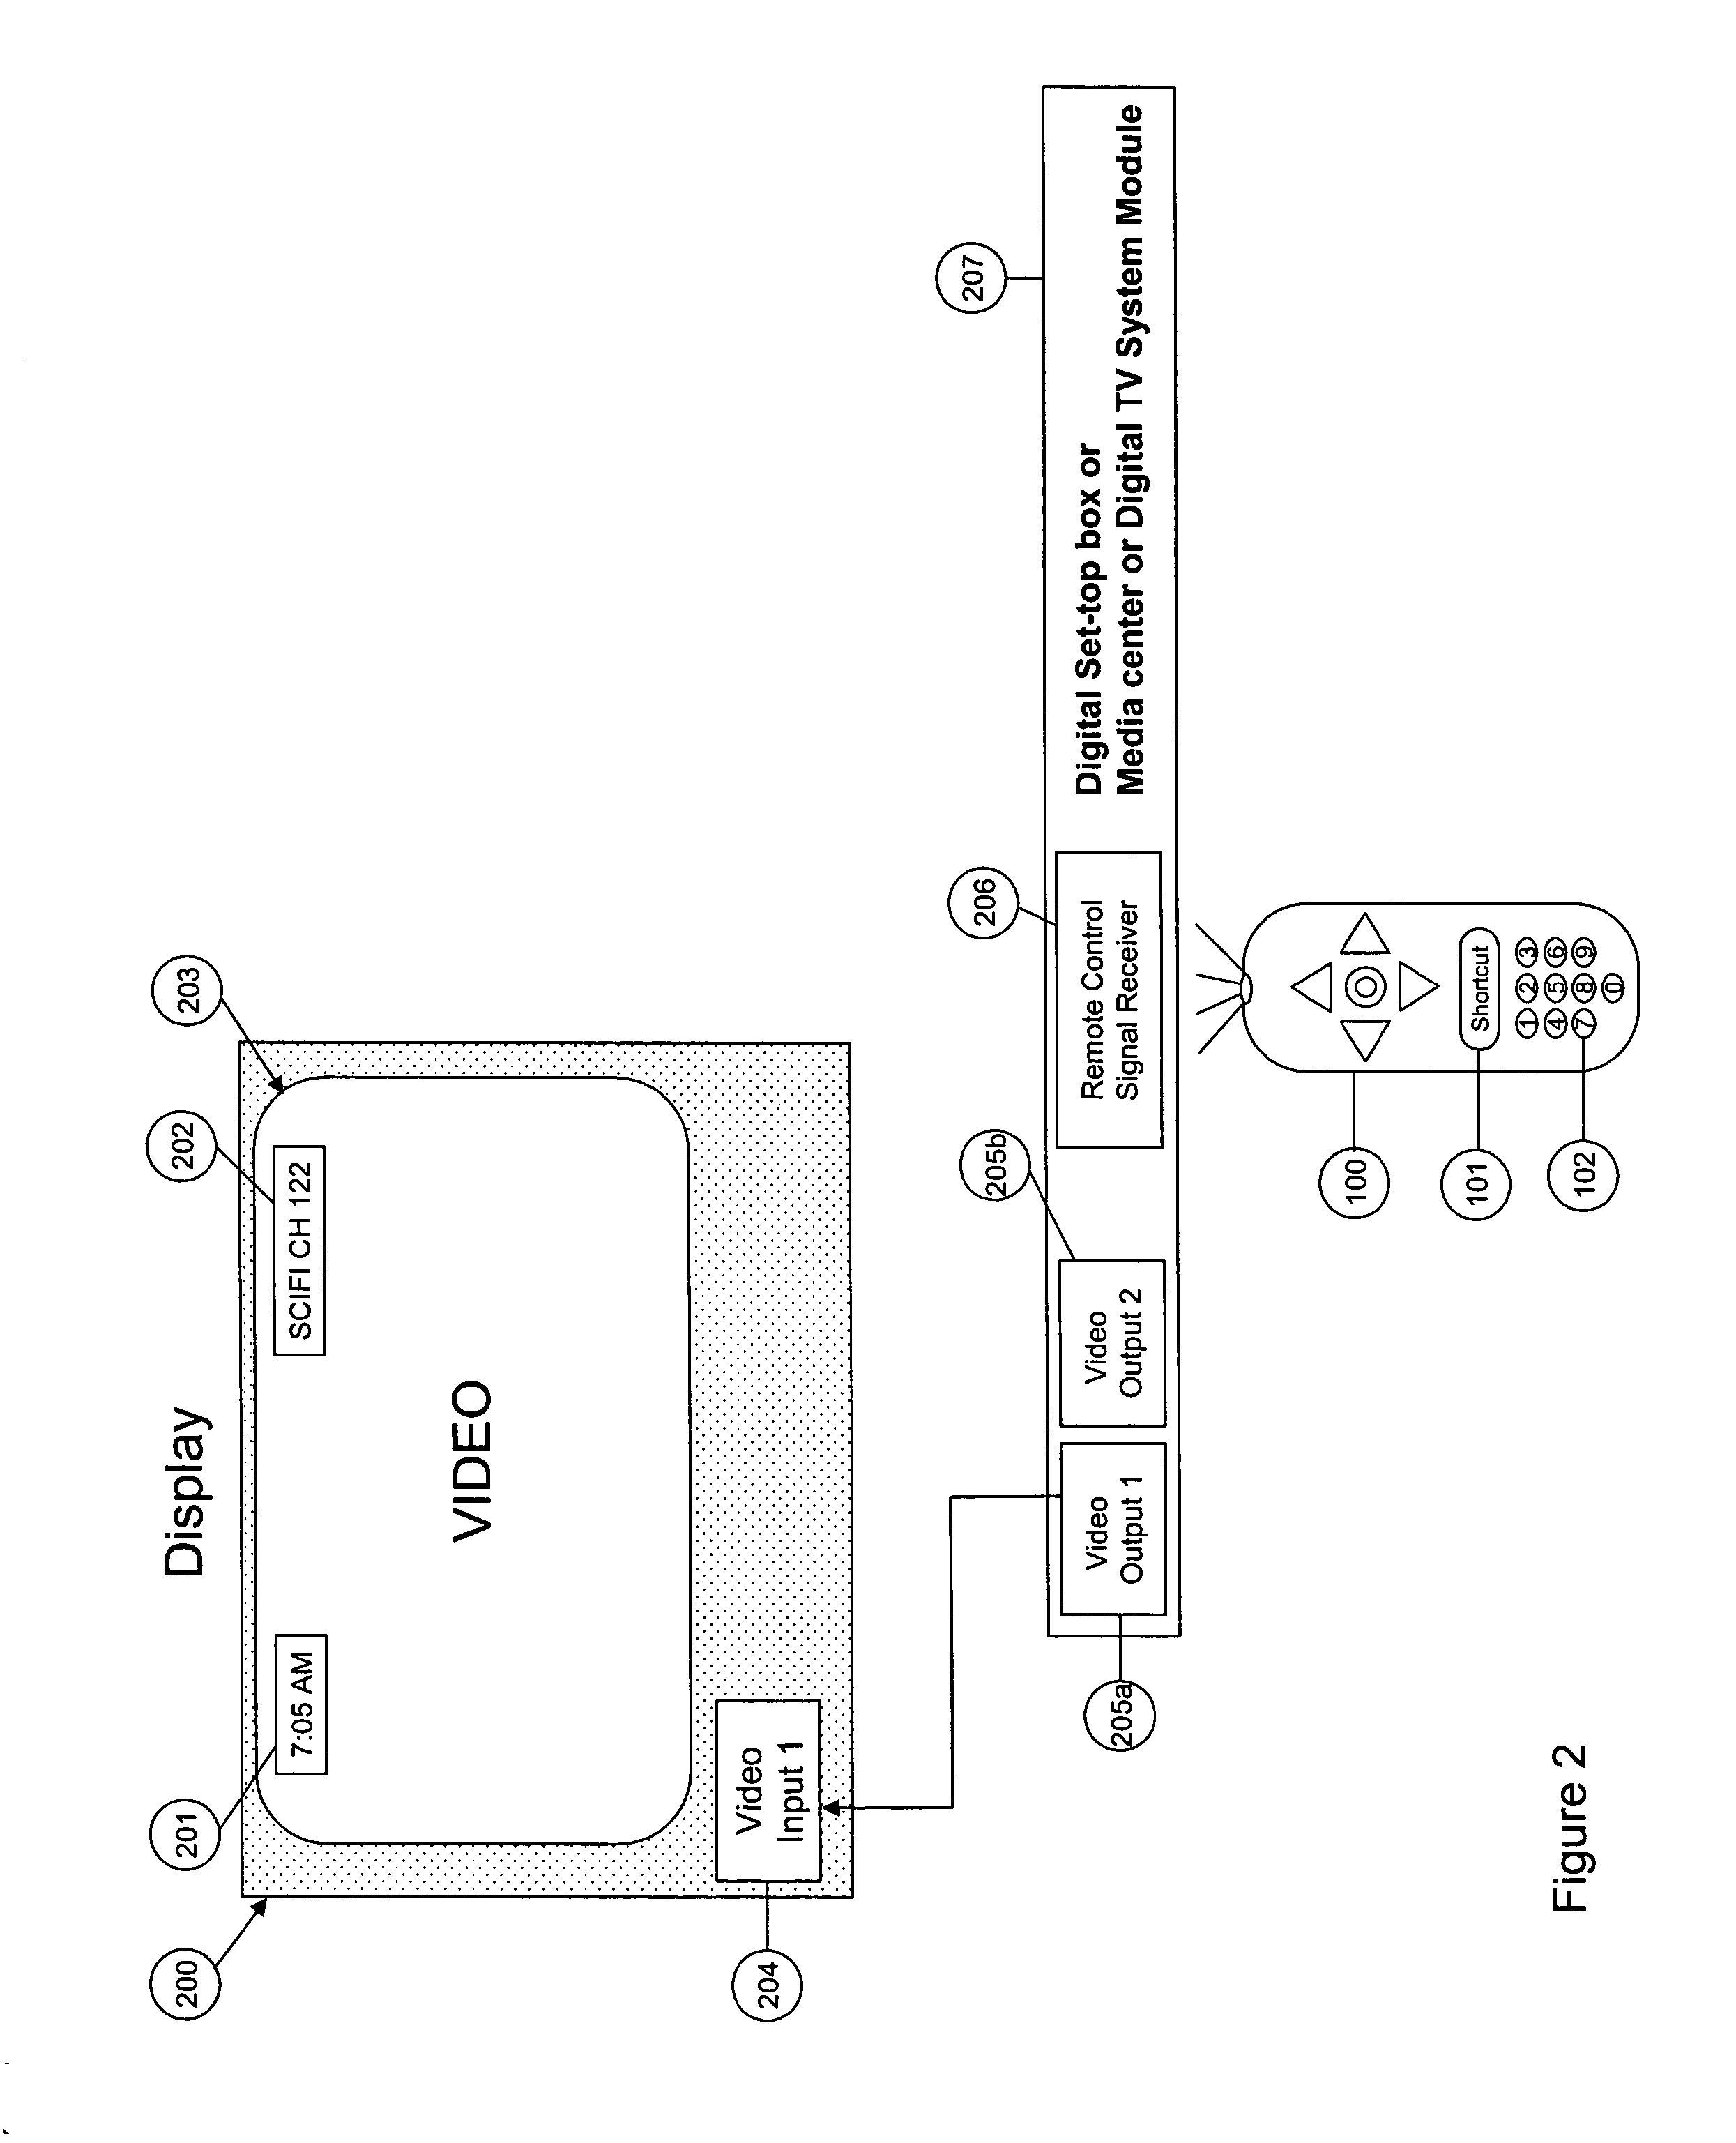 Network and local content access system and method